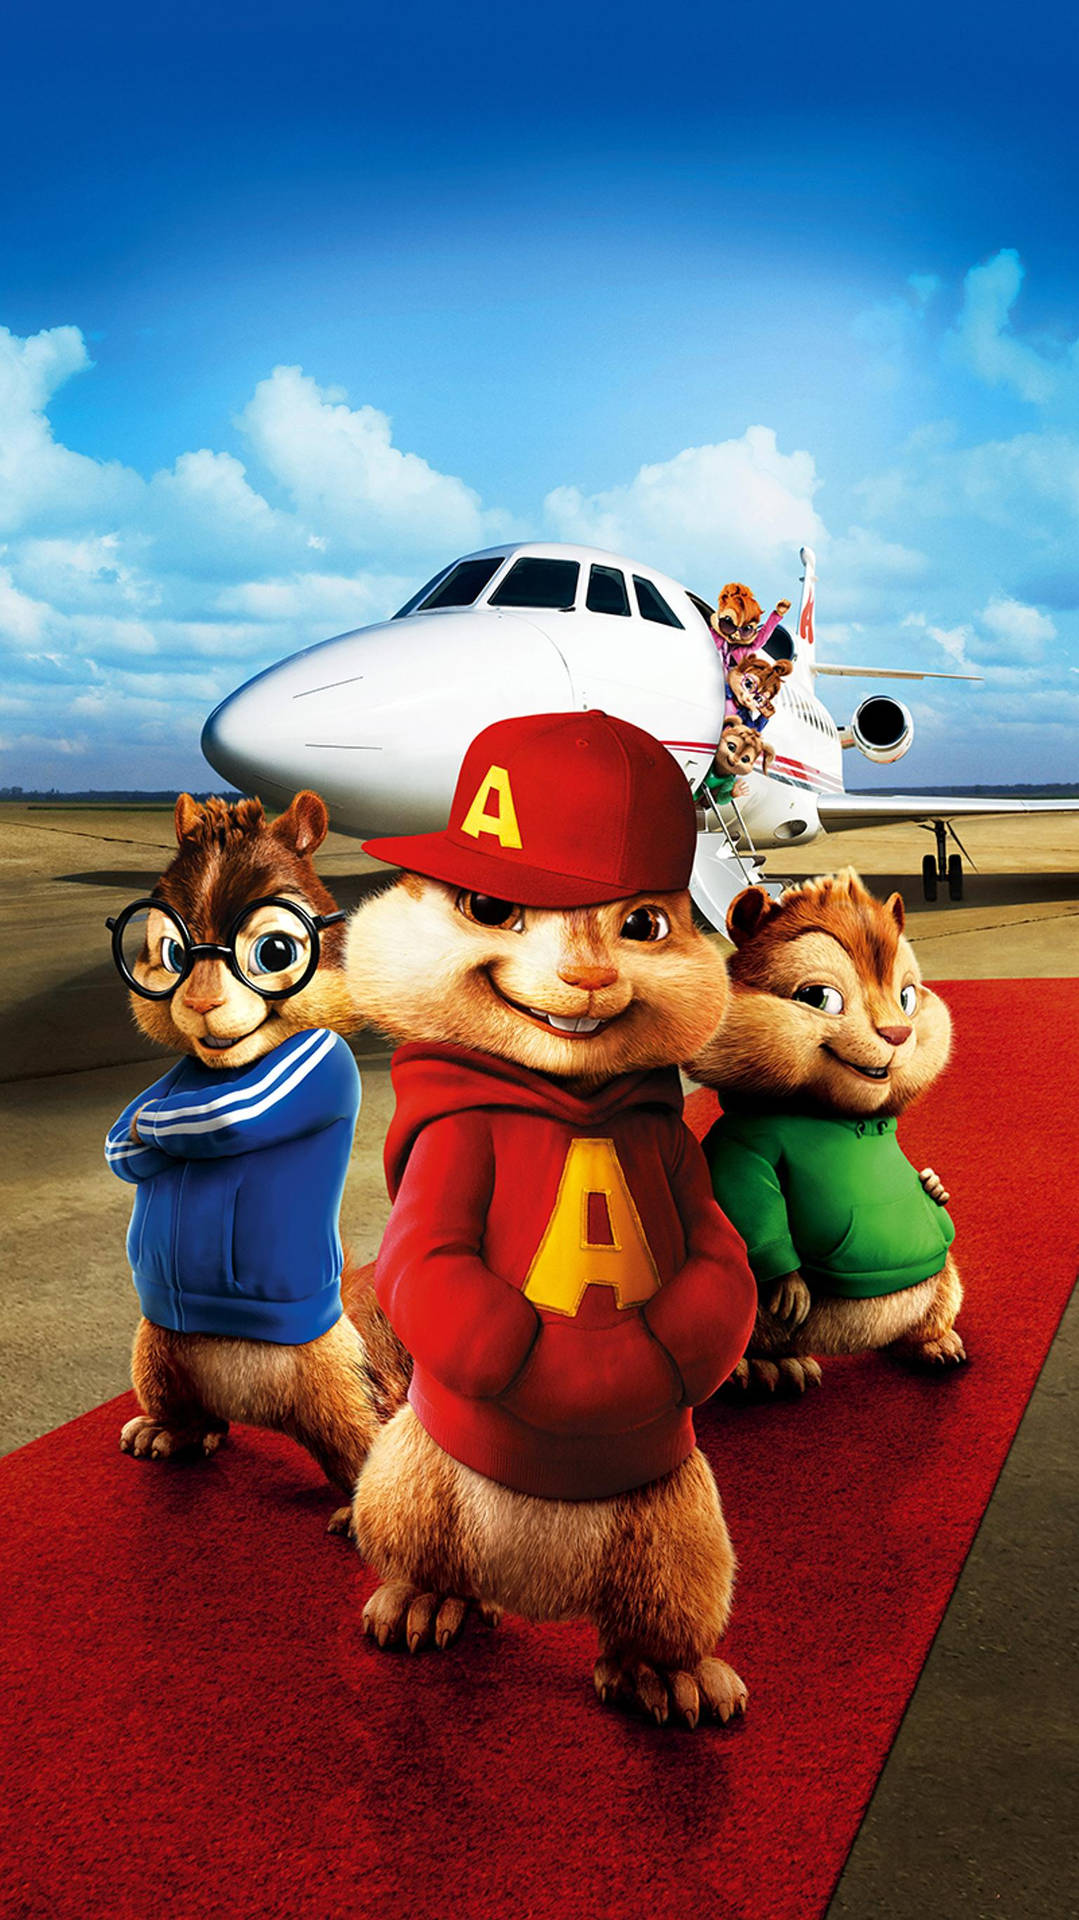 Top 999 Alvin And The Chipmunks Wallpaper Full HD 4K Free To Use